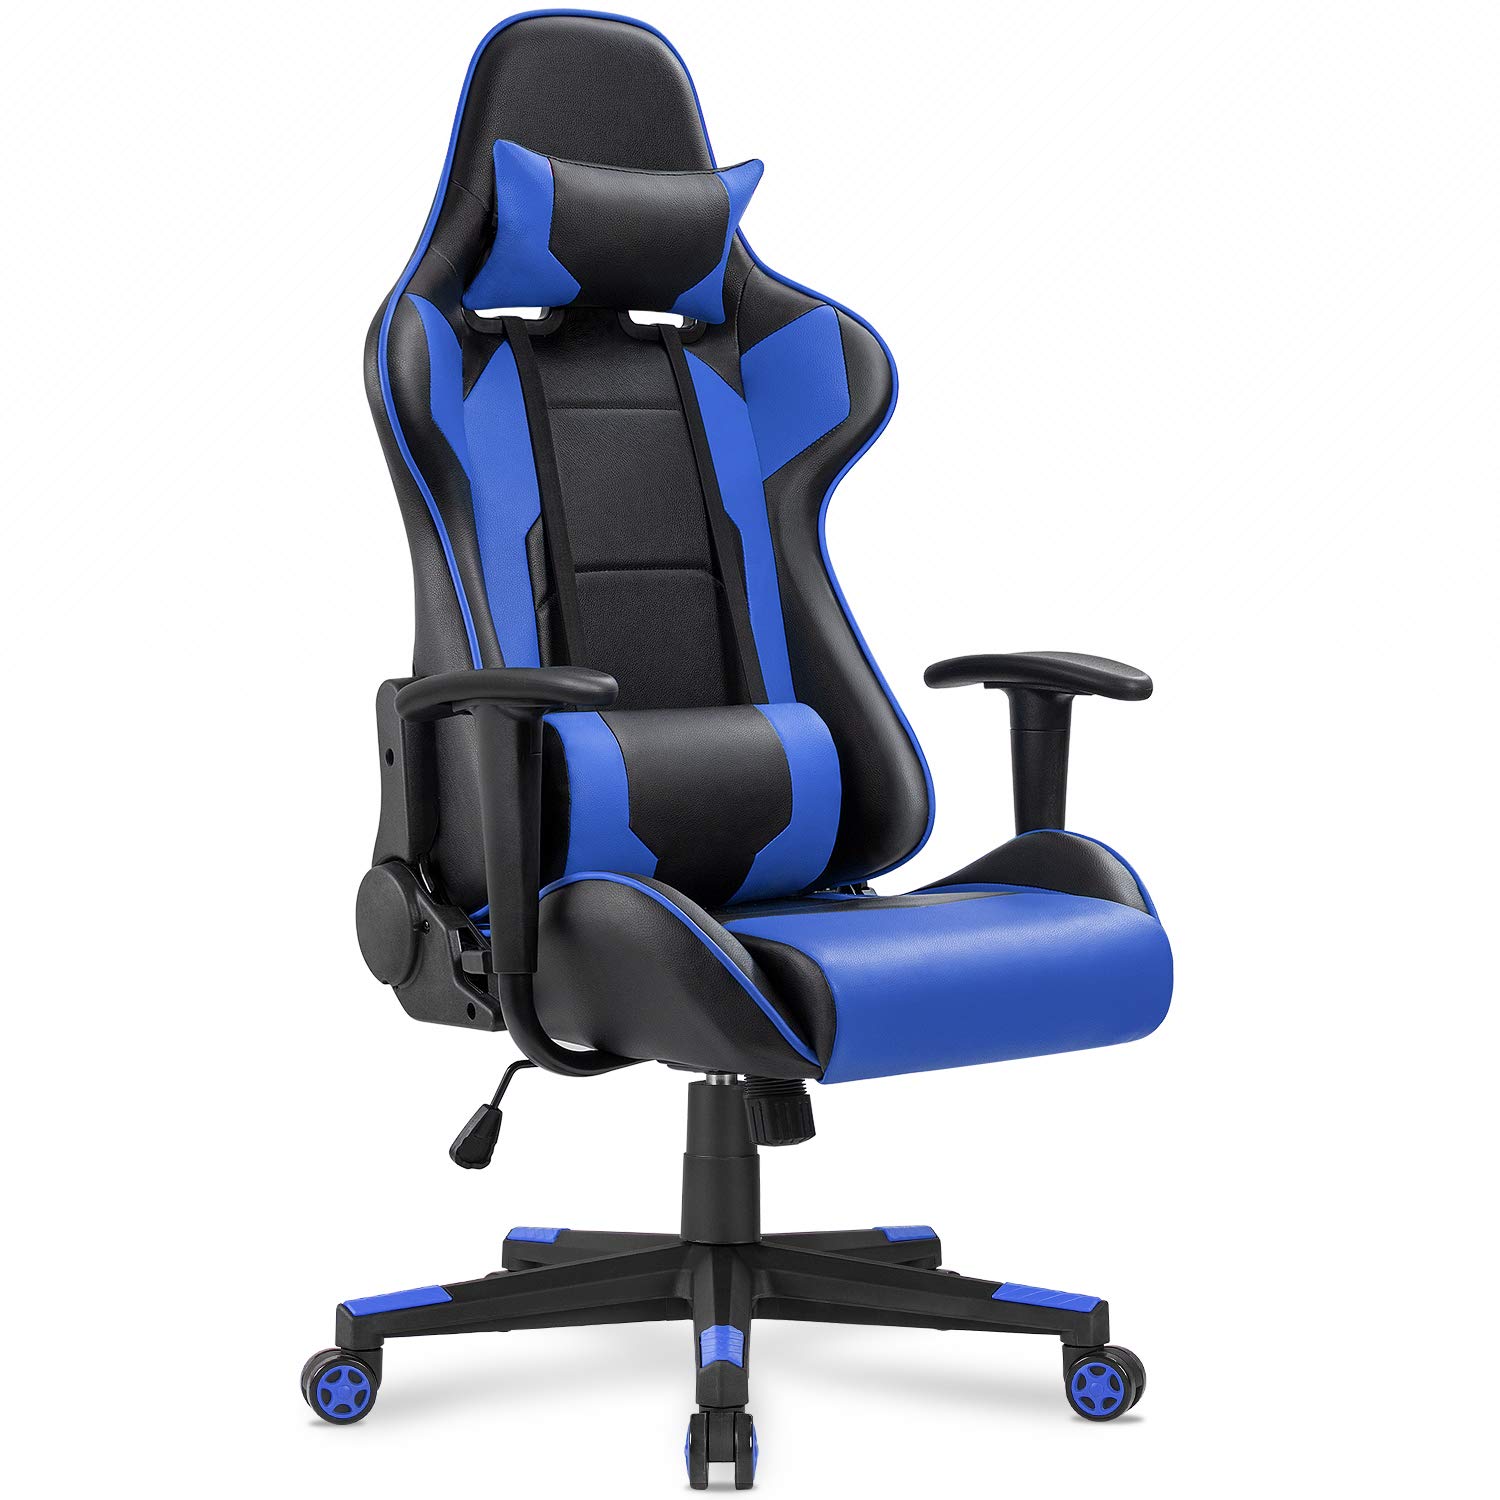 Unique S Racer Gaming Chair Price for Living room